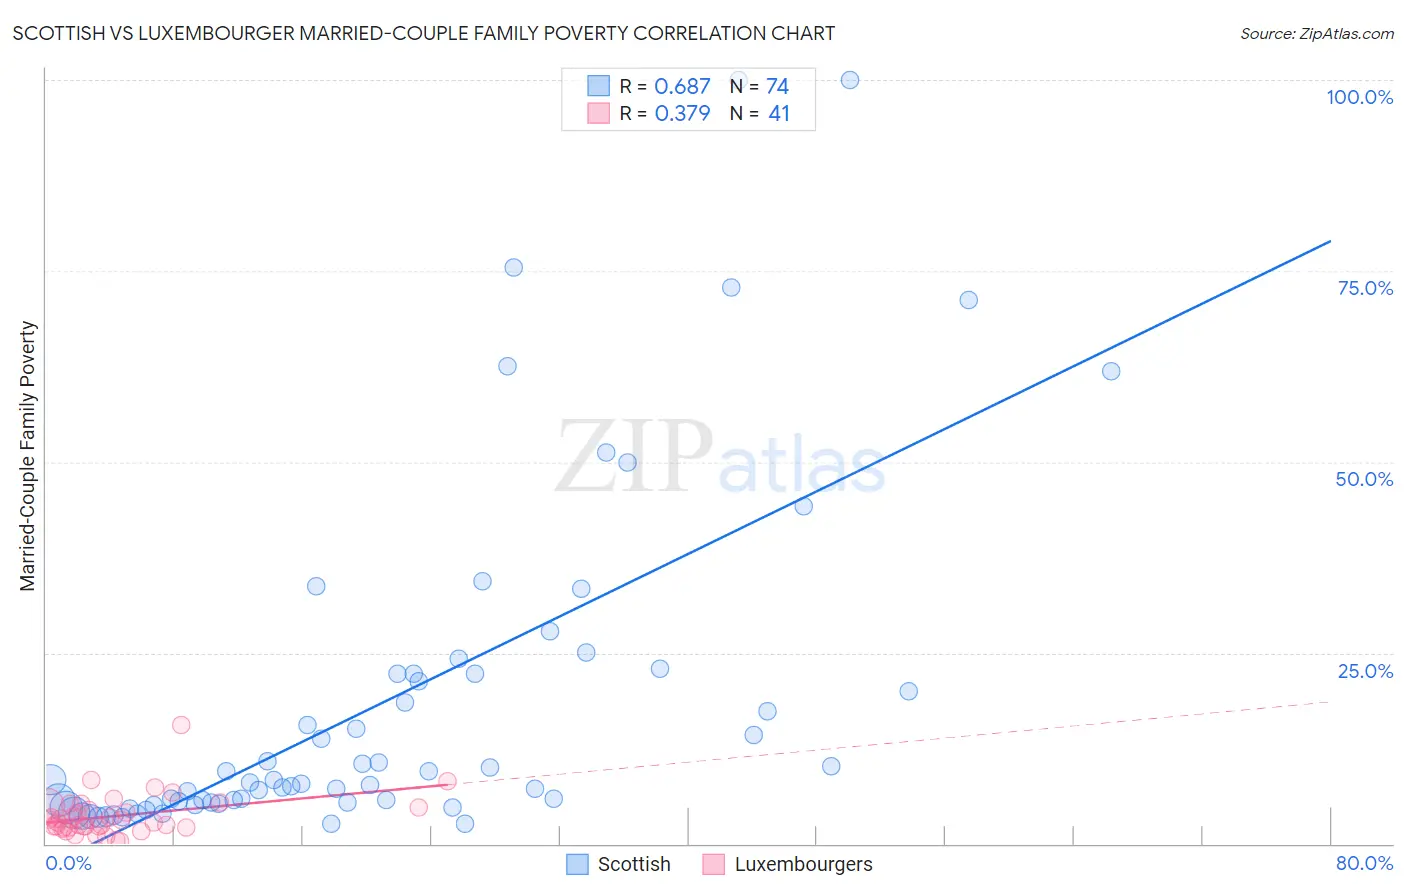 Scottish vs Luxembourger Married-Couple Family Poverty